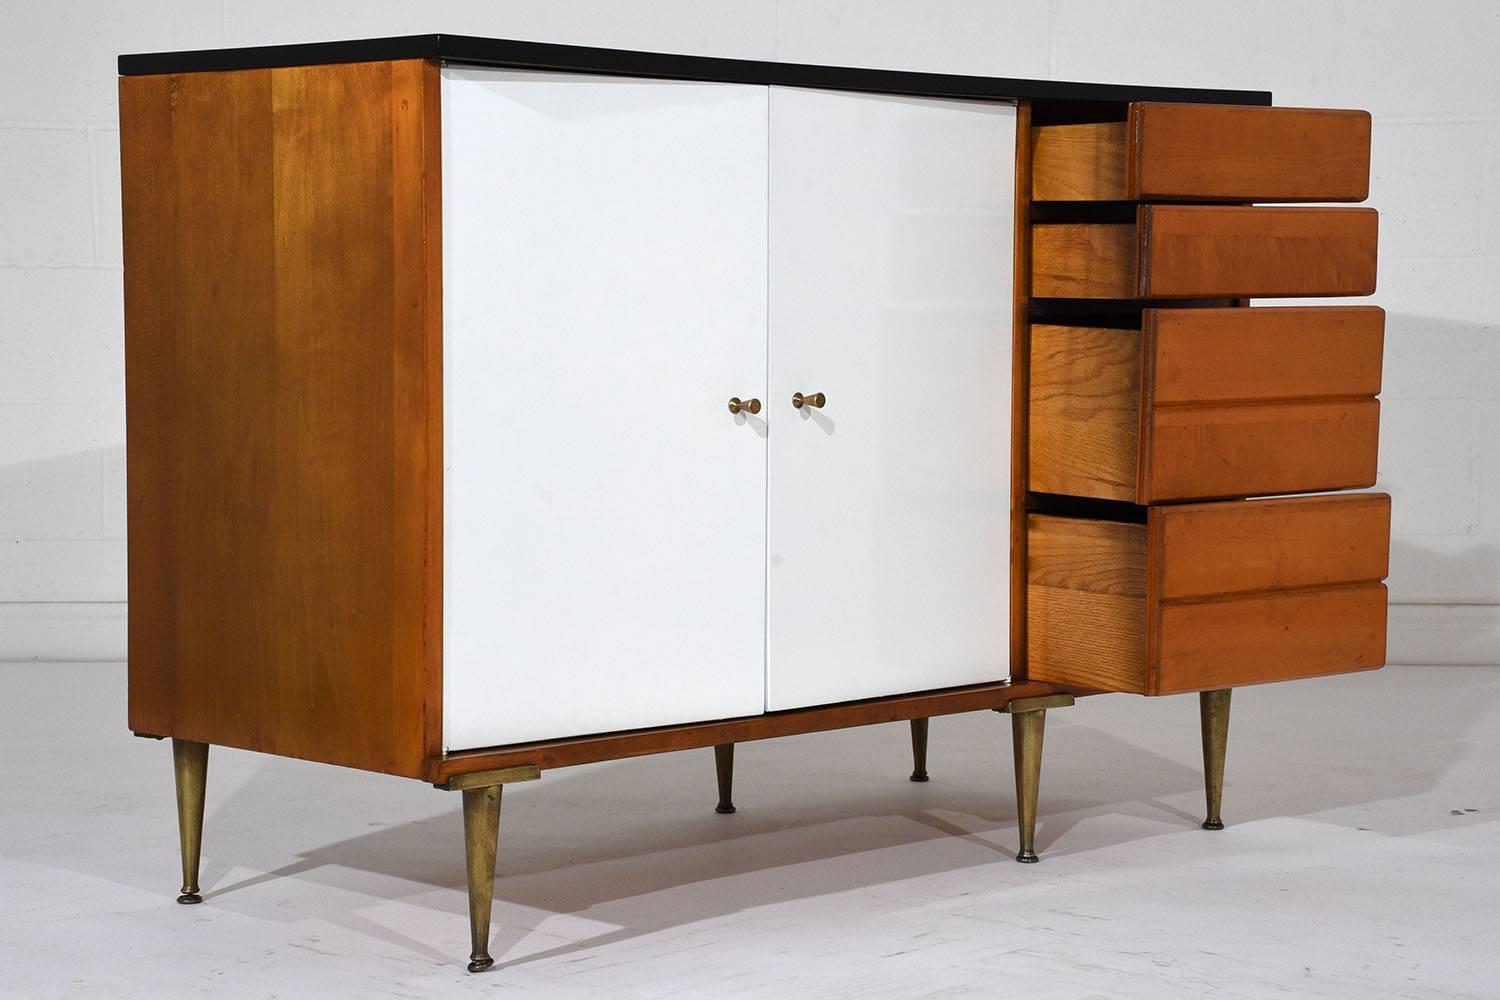 Painted Mid-Century Modern Credenza by Paul McCobb